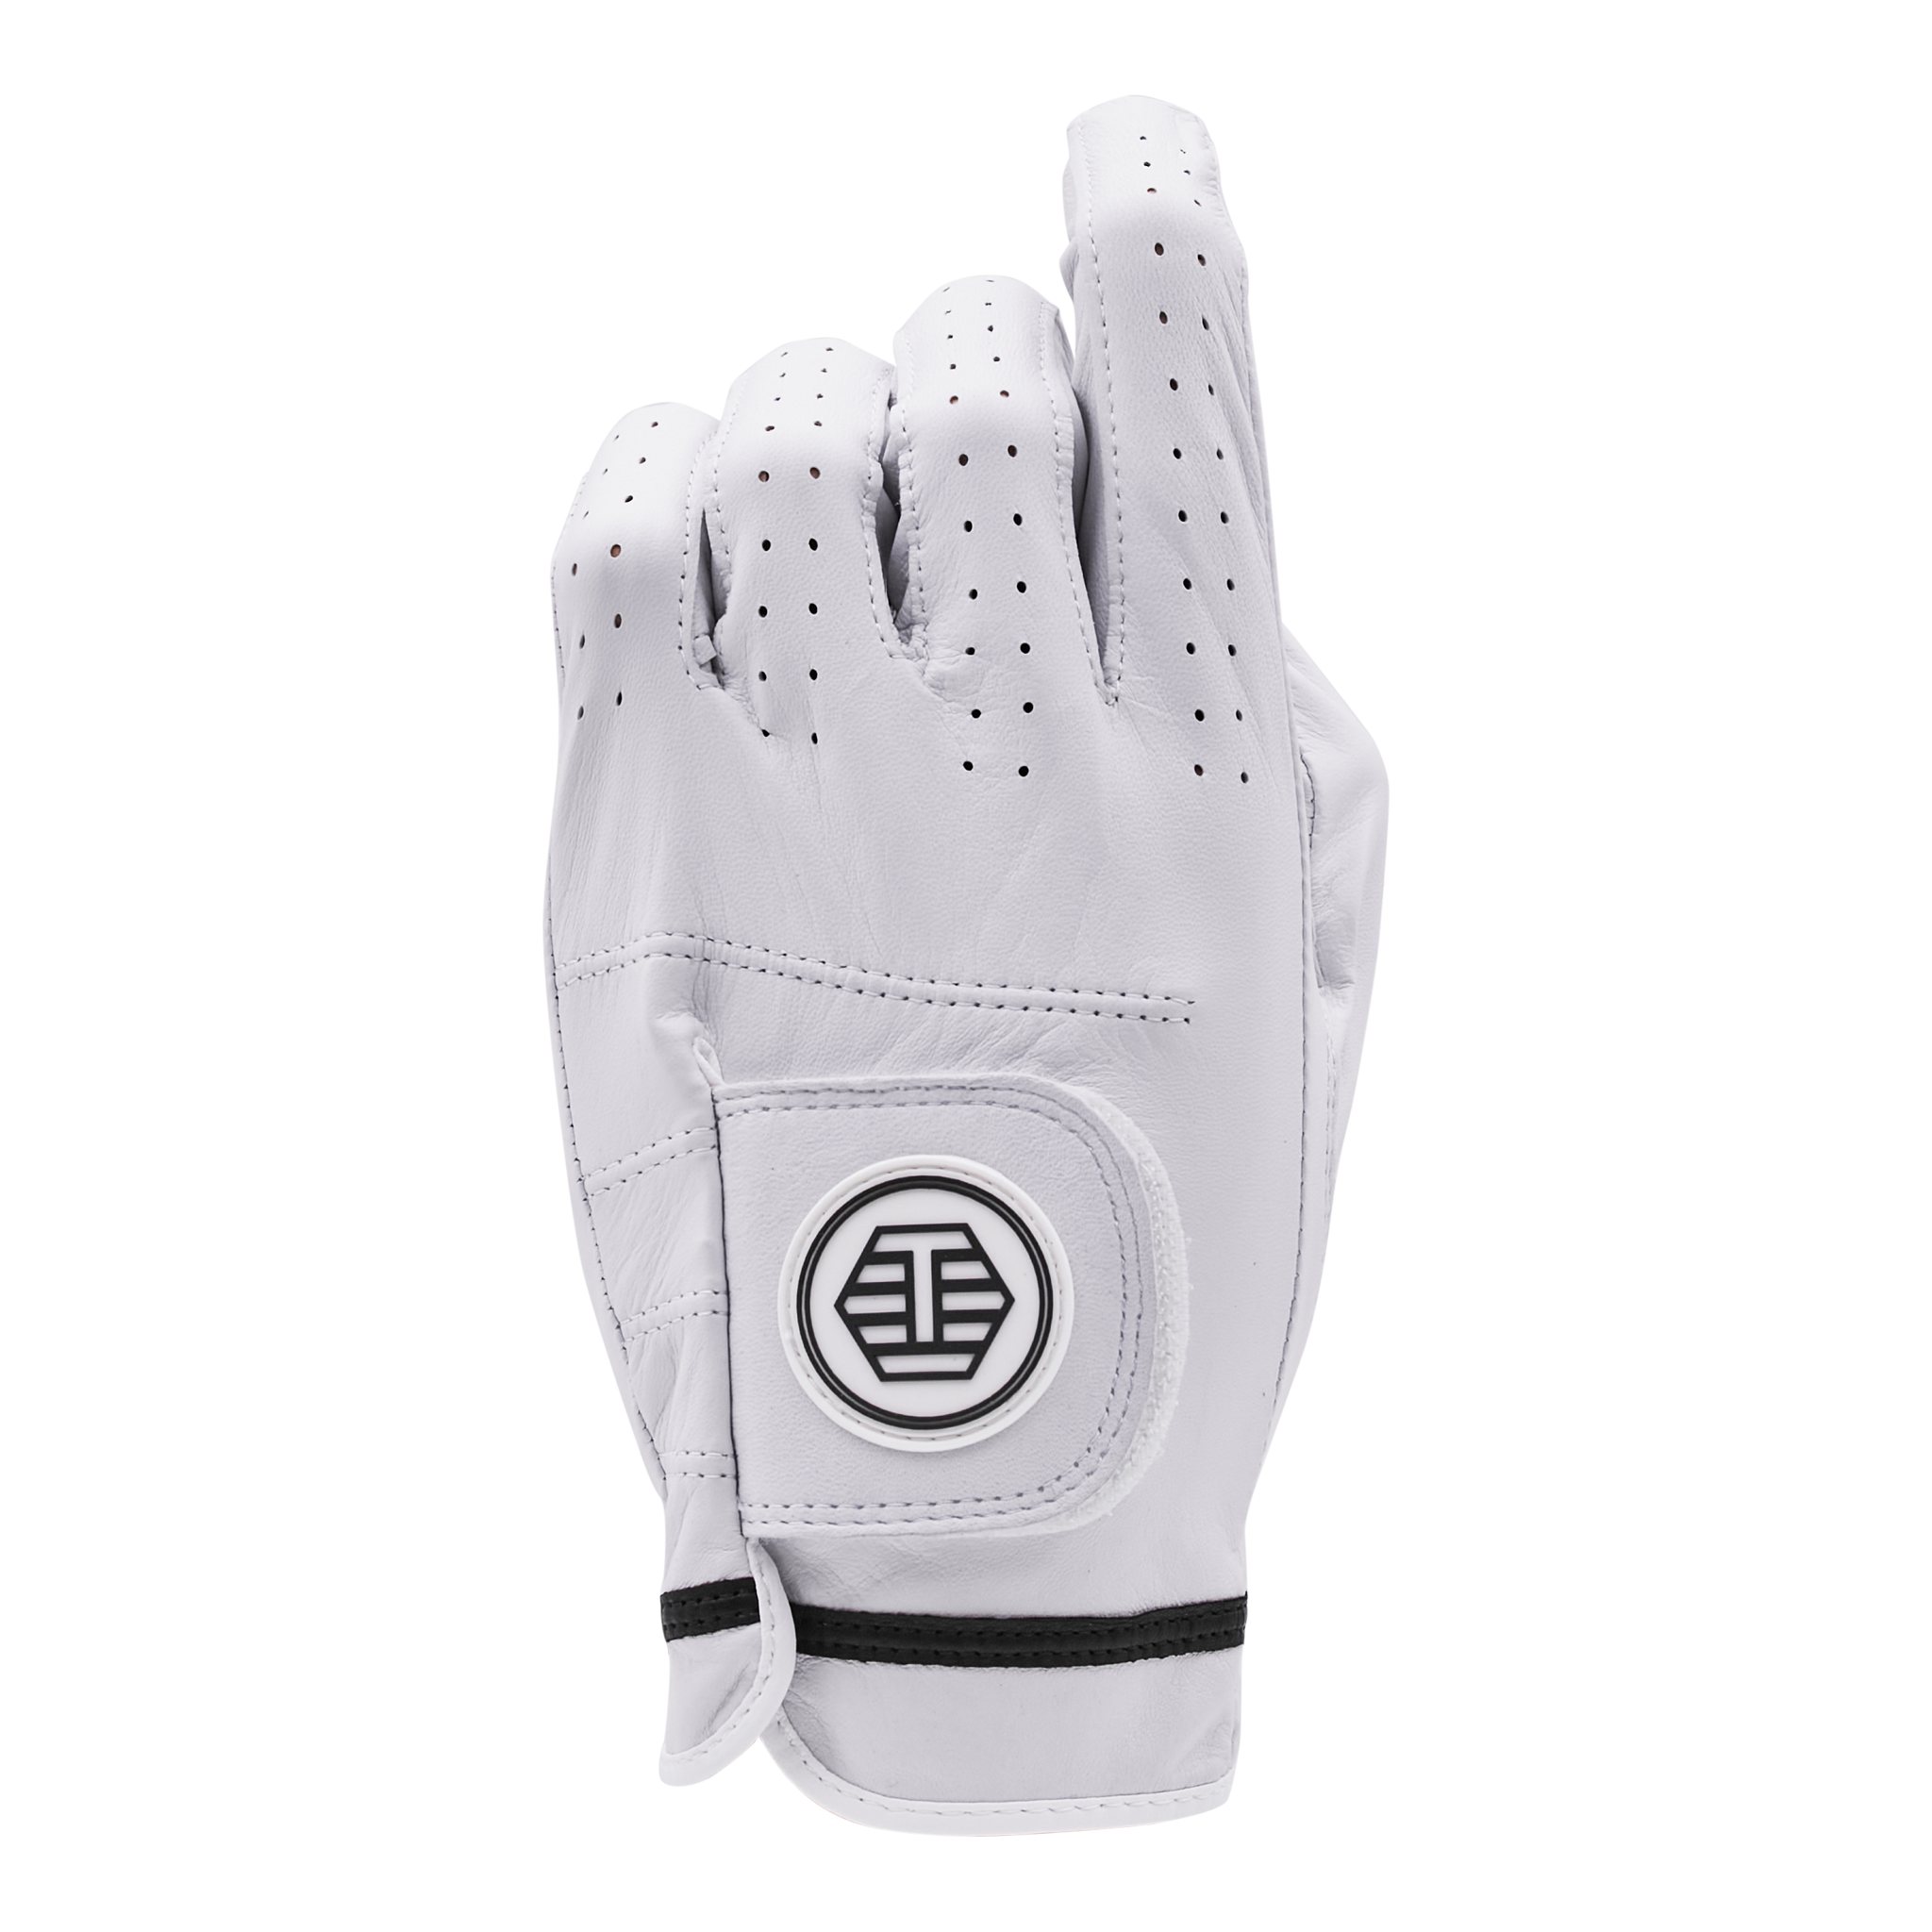 T-Hive Premium Golf Glove - Left Hand (For Righties) - back